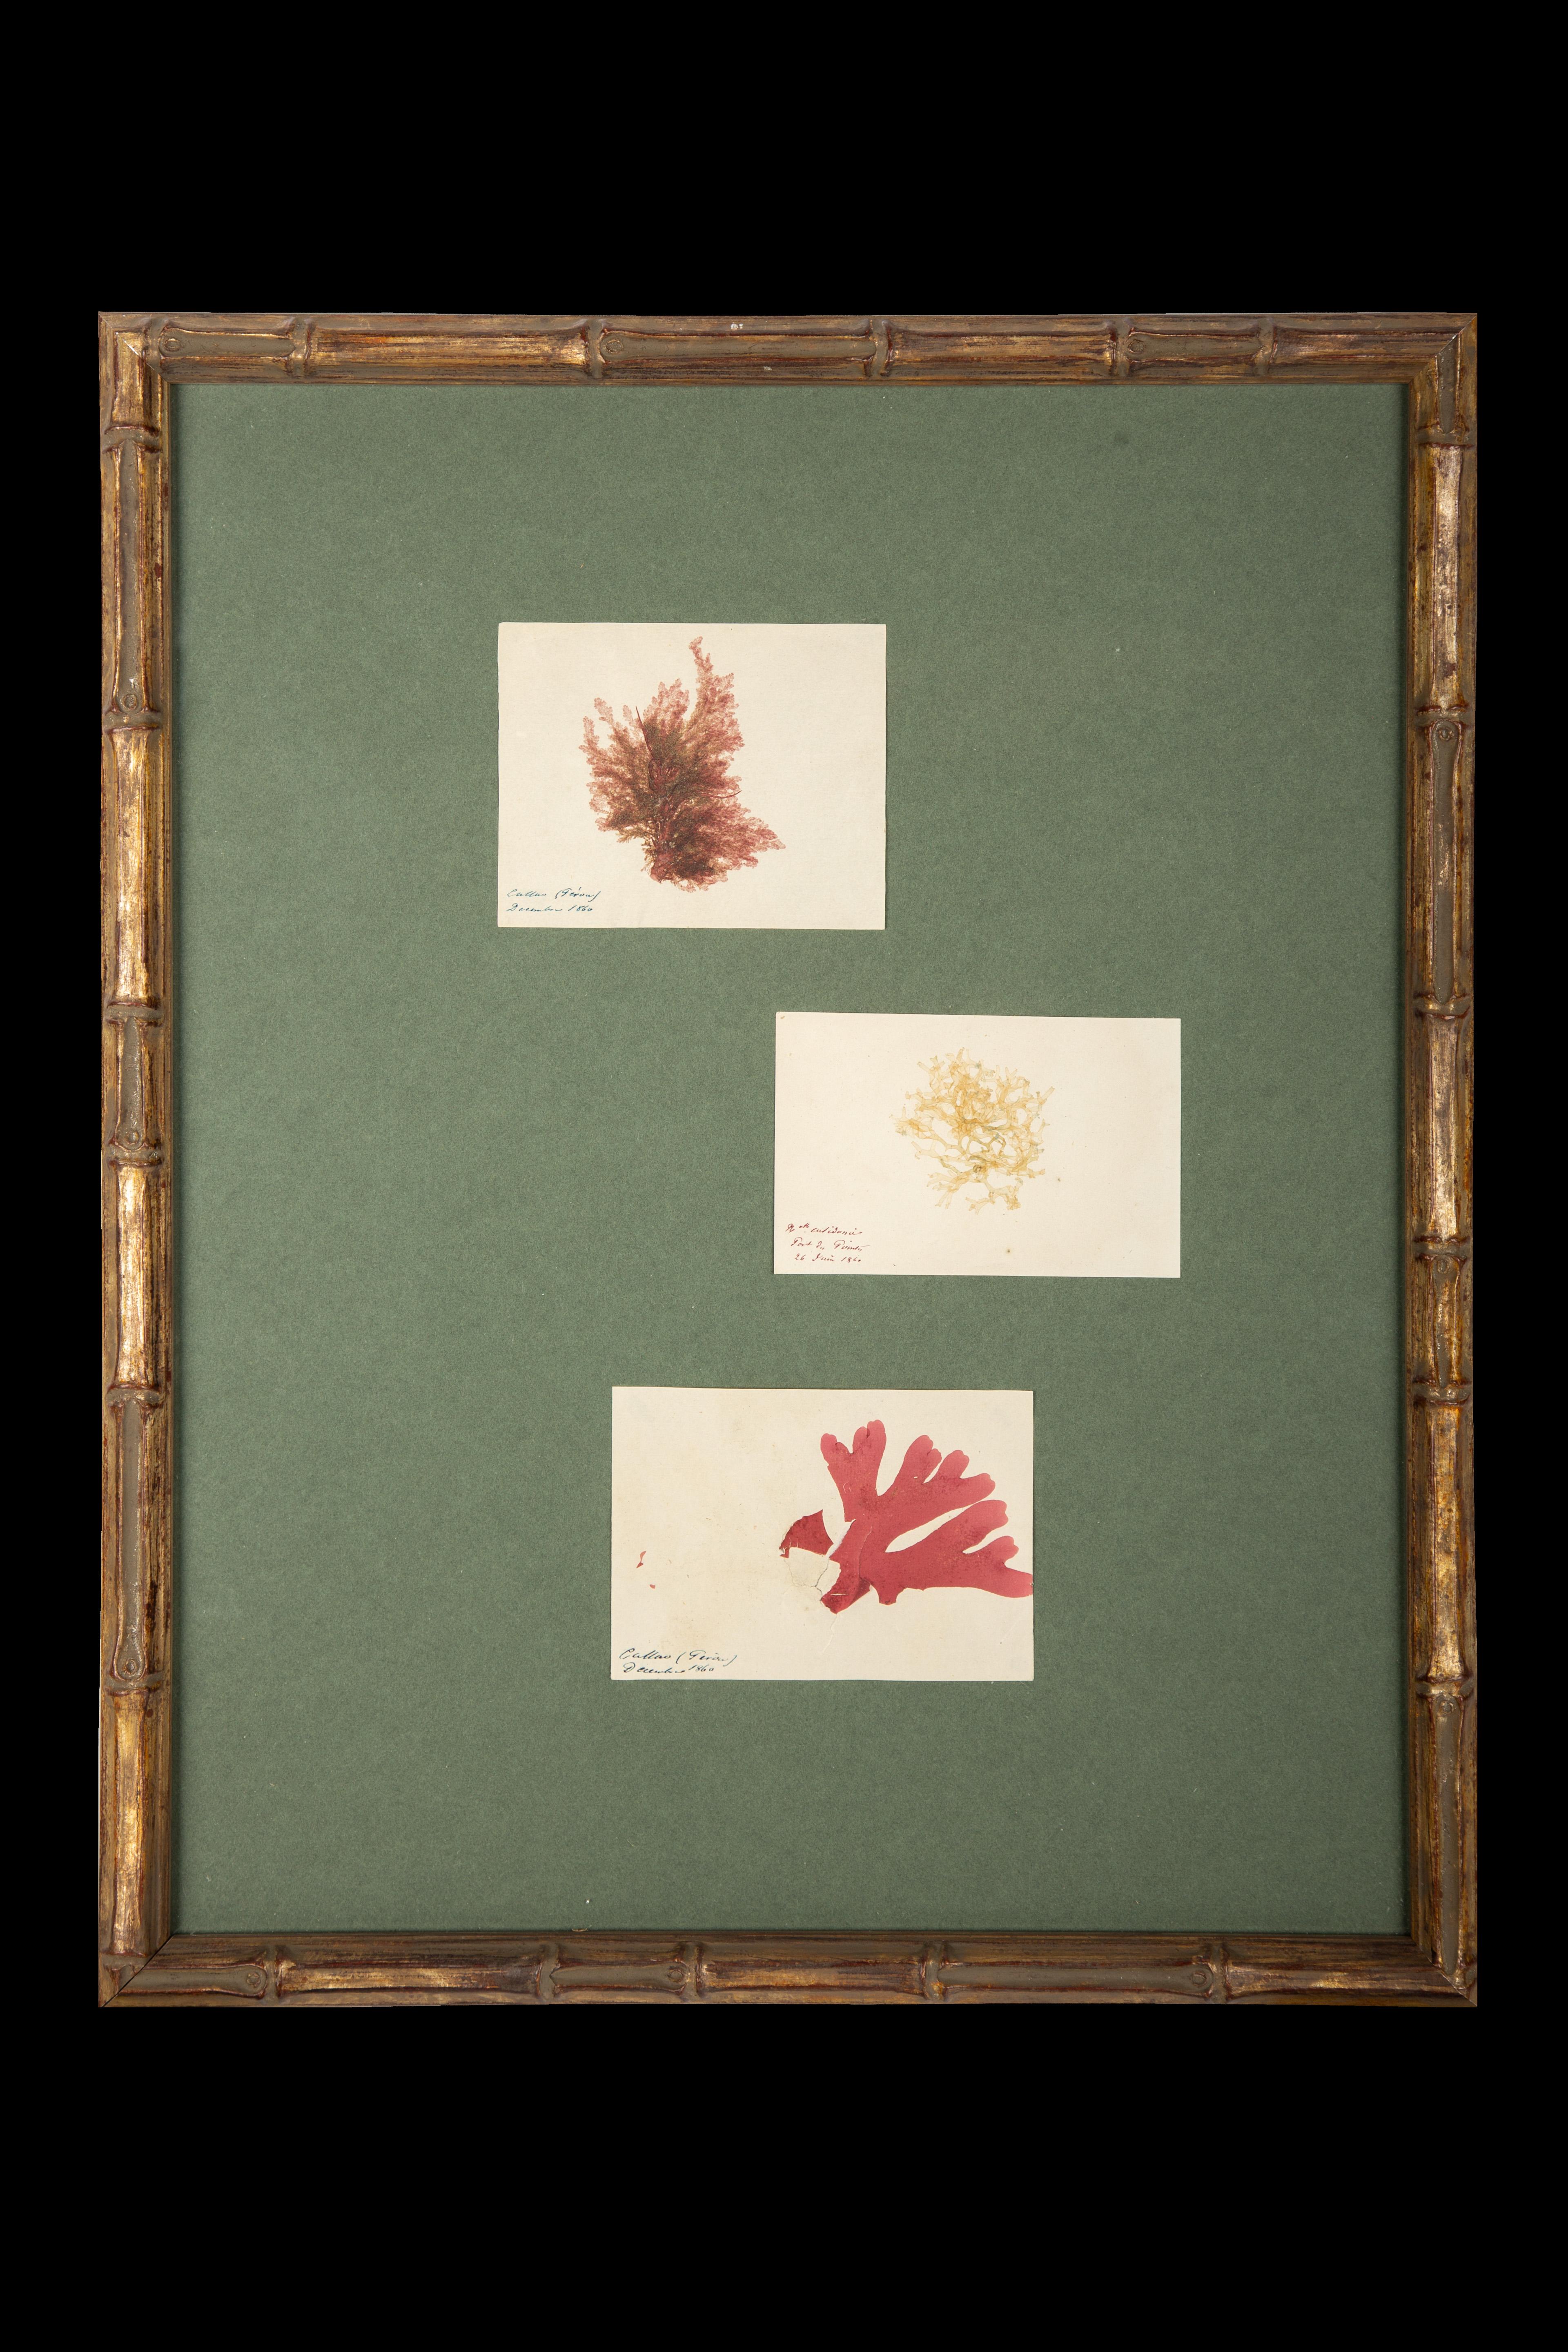 Framed and Pressed French Alguier Specimens from the 19th Century 2